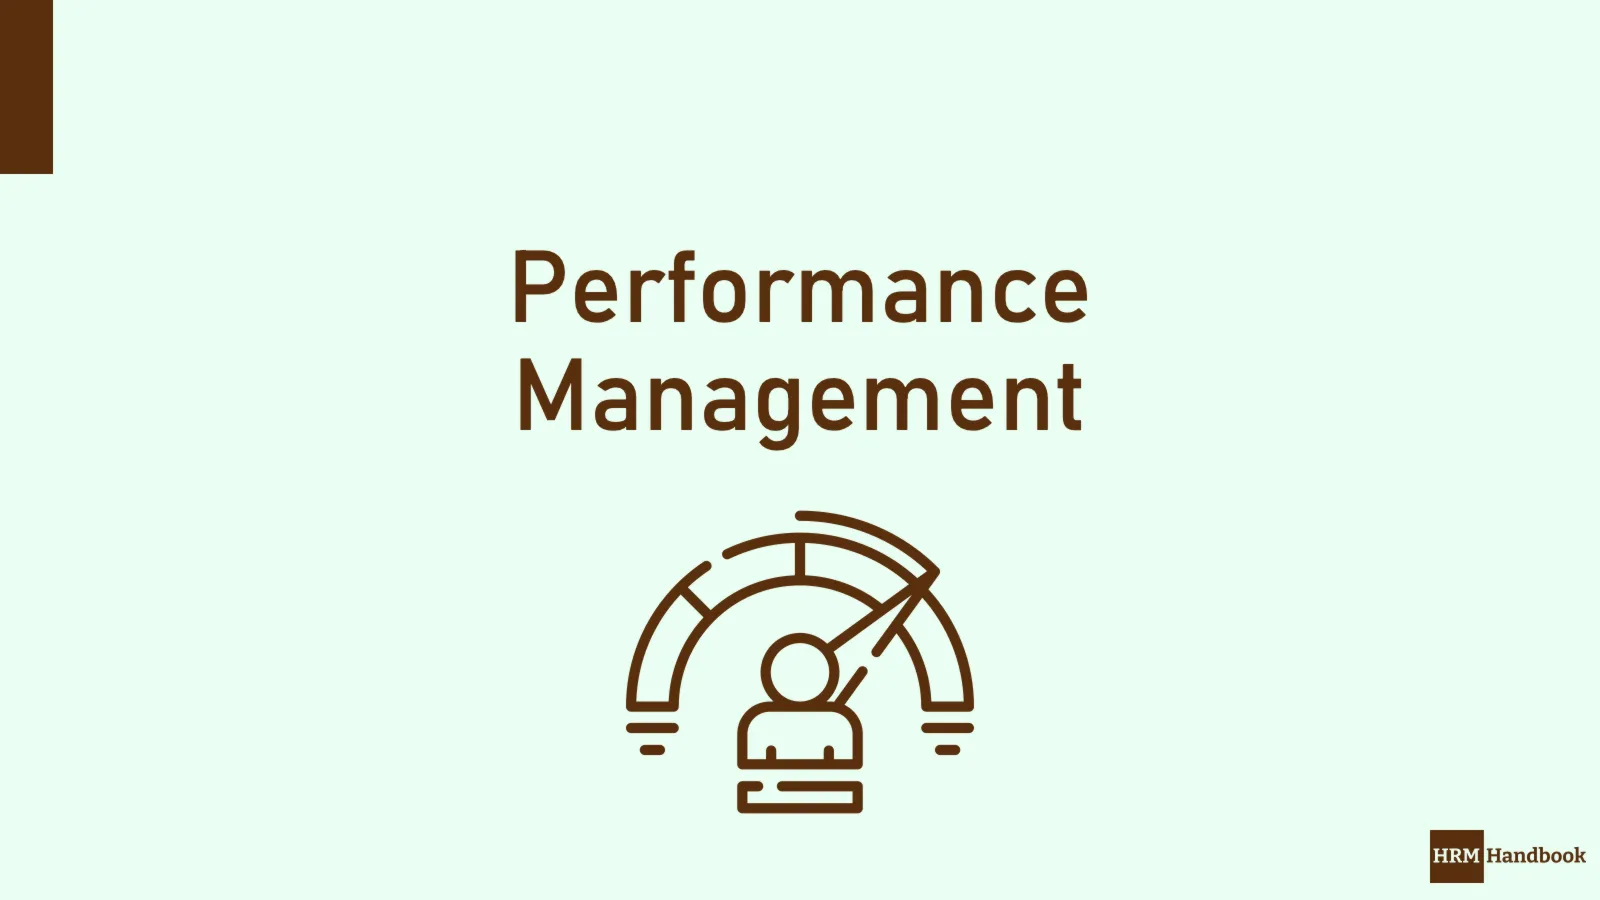 explain the relationship between motivation and performance management